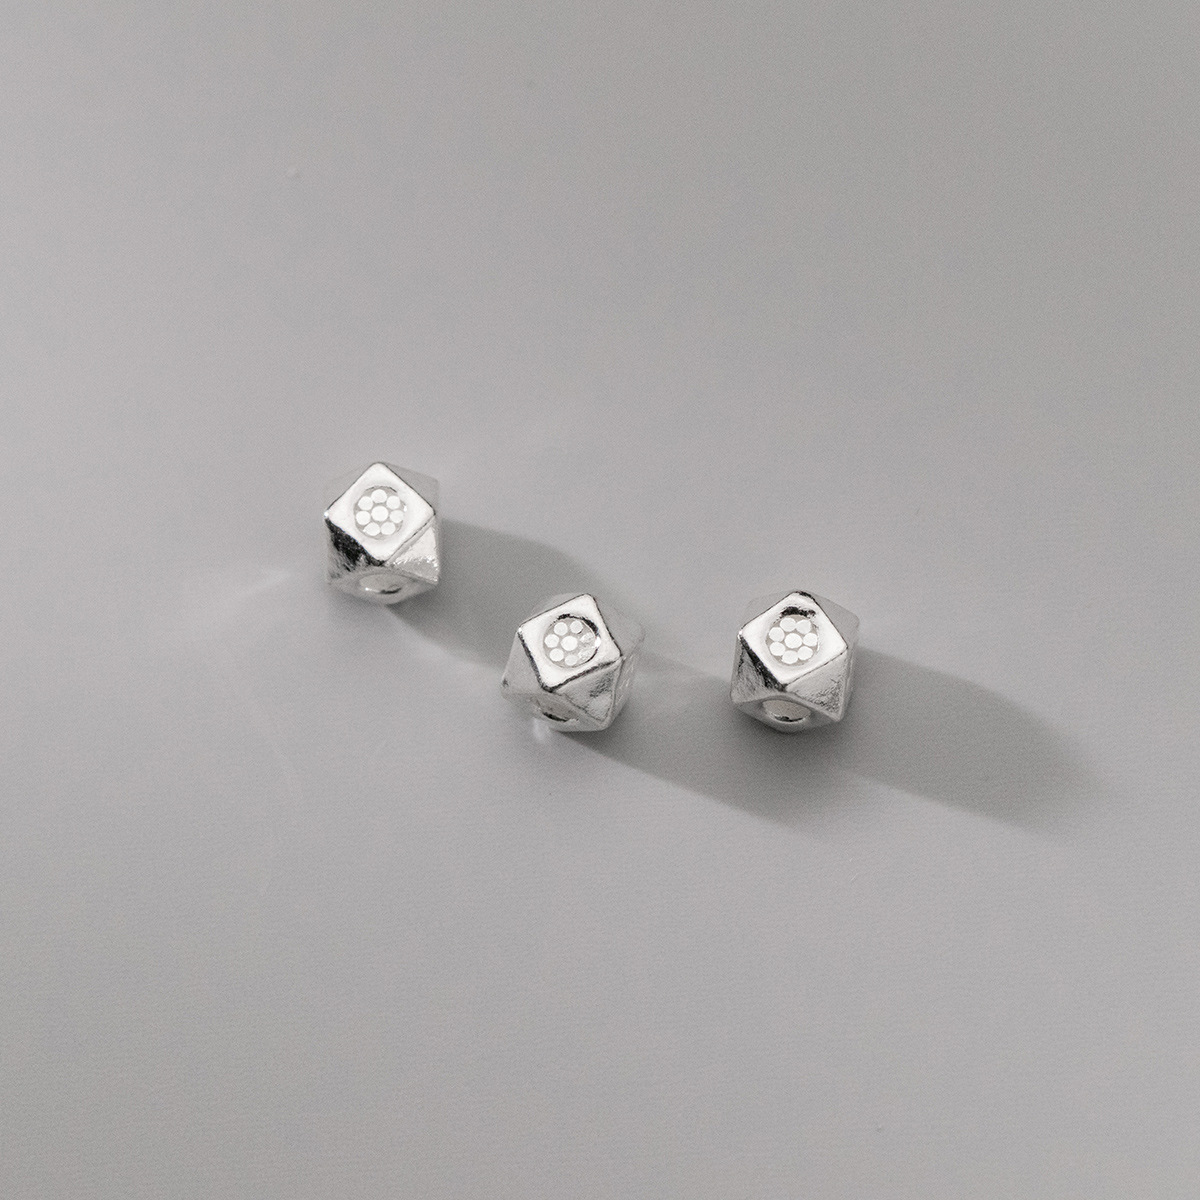 Plain silver, small size 4.5 mm